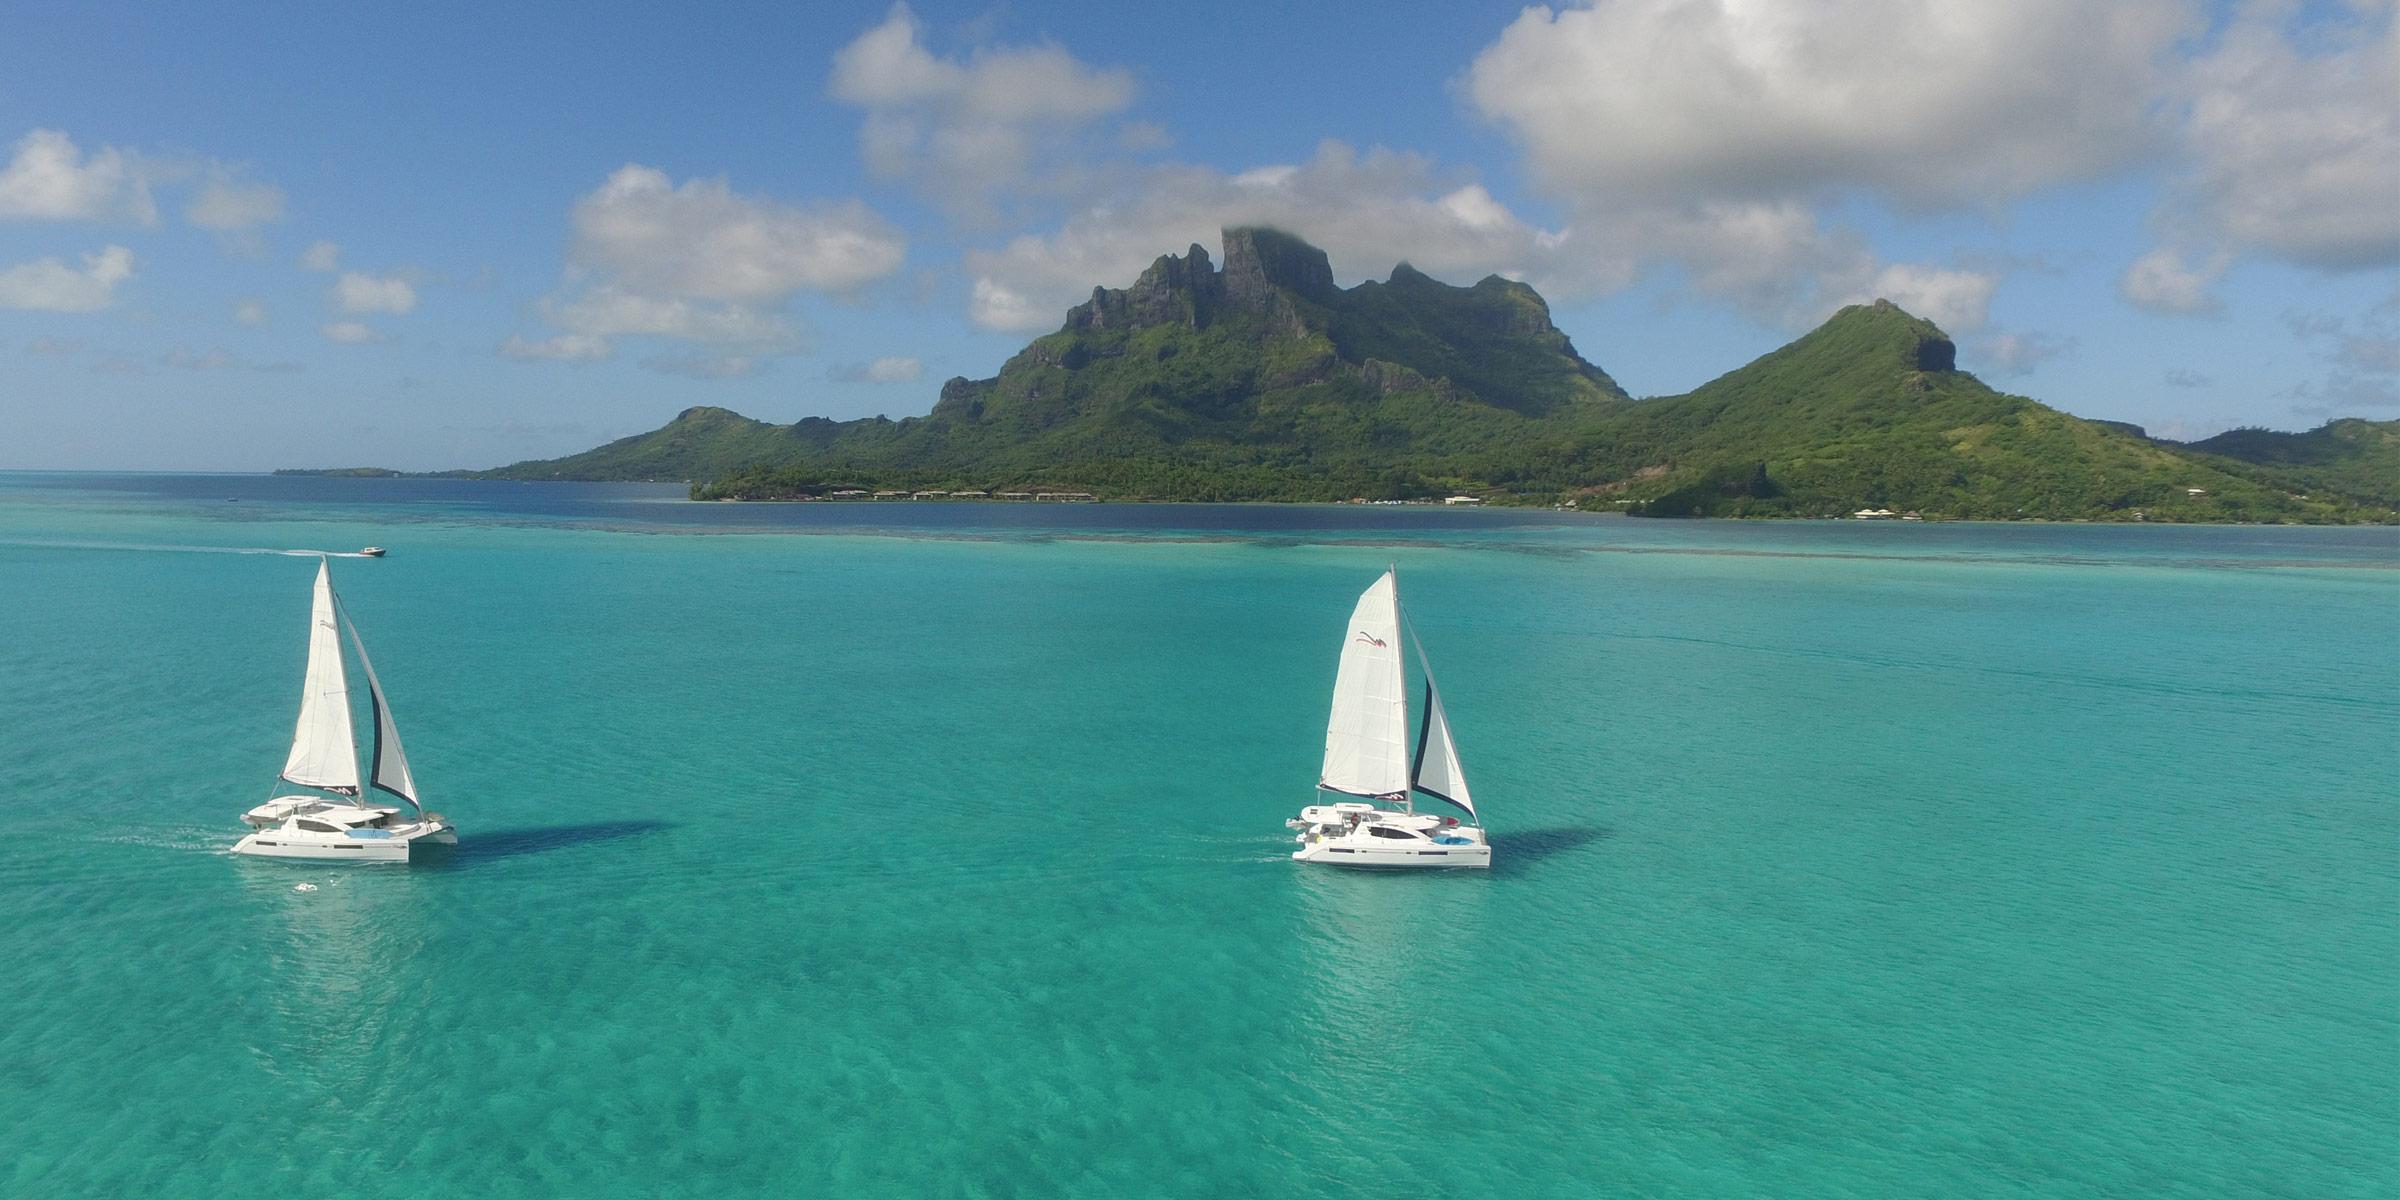 Two Moorings 4800 under sail with Bora Bora in the background